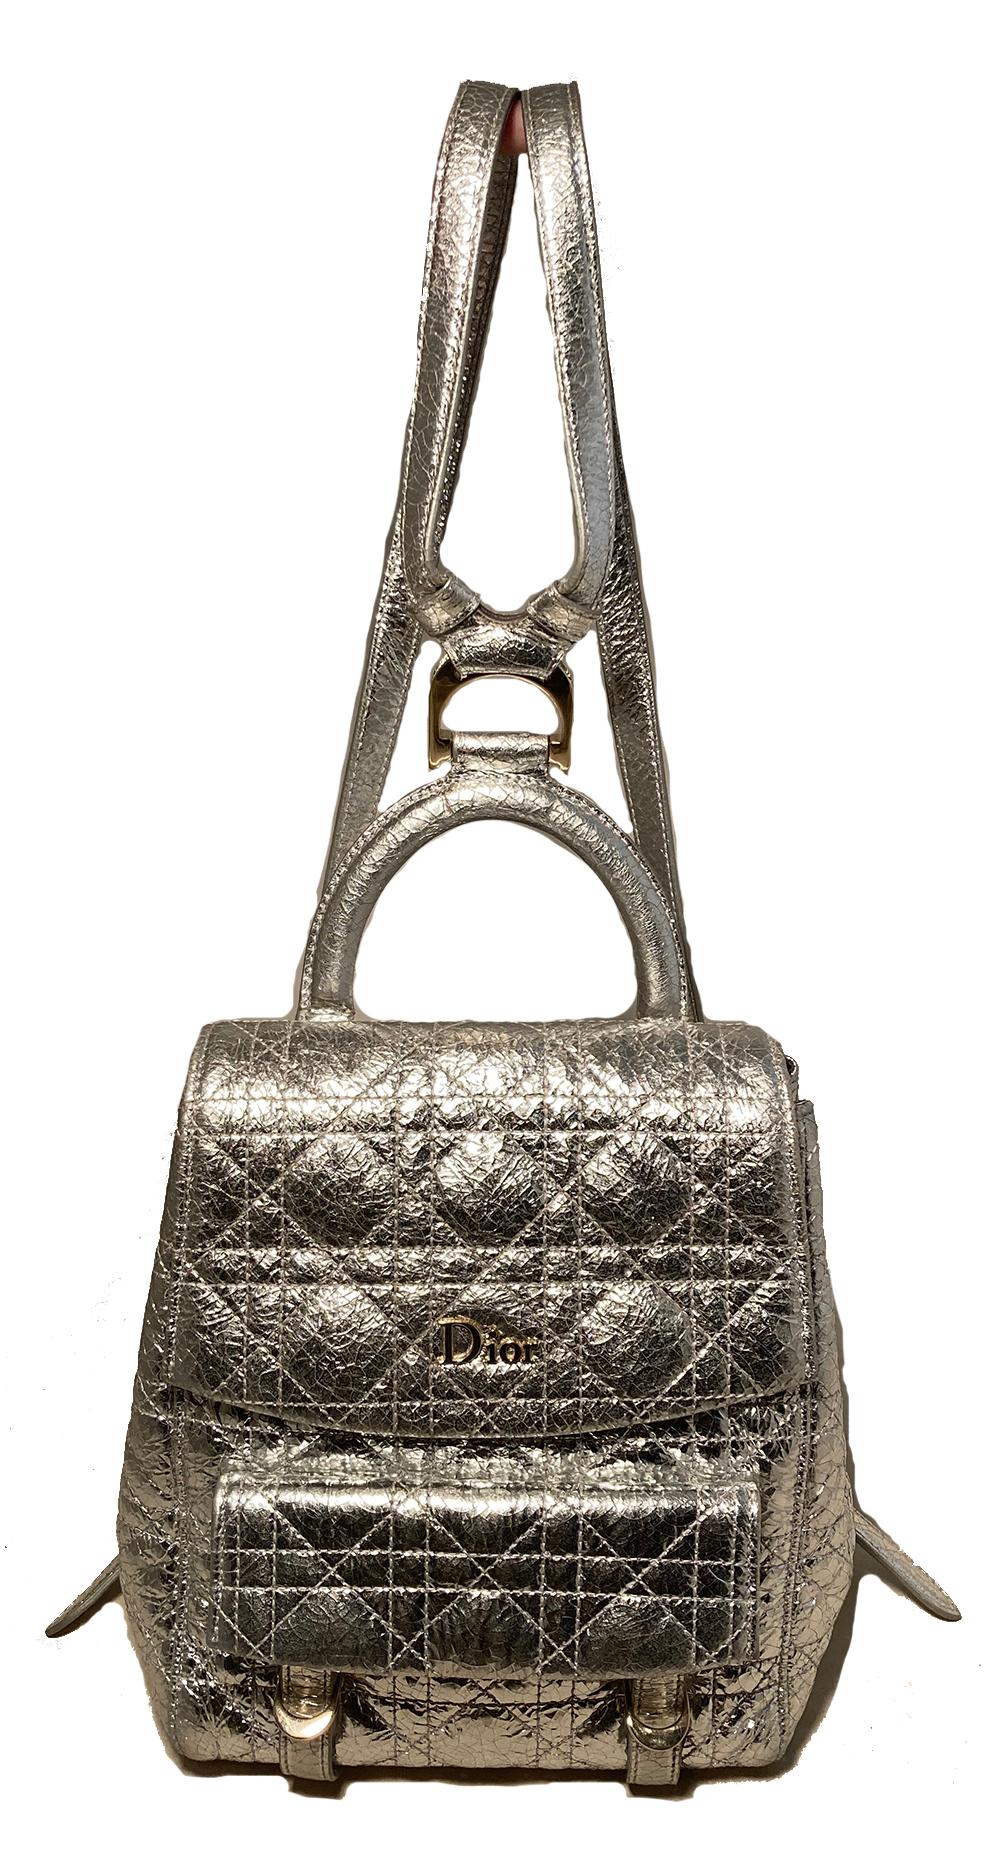 Dior Stardust silver Leather Backpack in excellent condition. Silver crackled patent leather exterior quilted in classic dior cannage style and trimmed with silver hardware. Front double buckle flap pocket. Back slit pocket. Double matching metallic